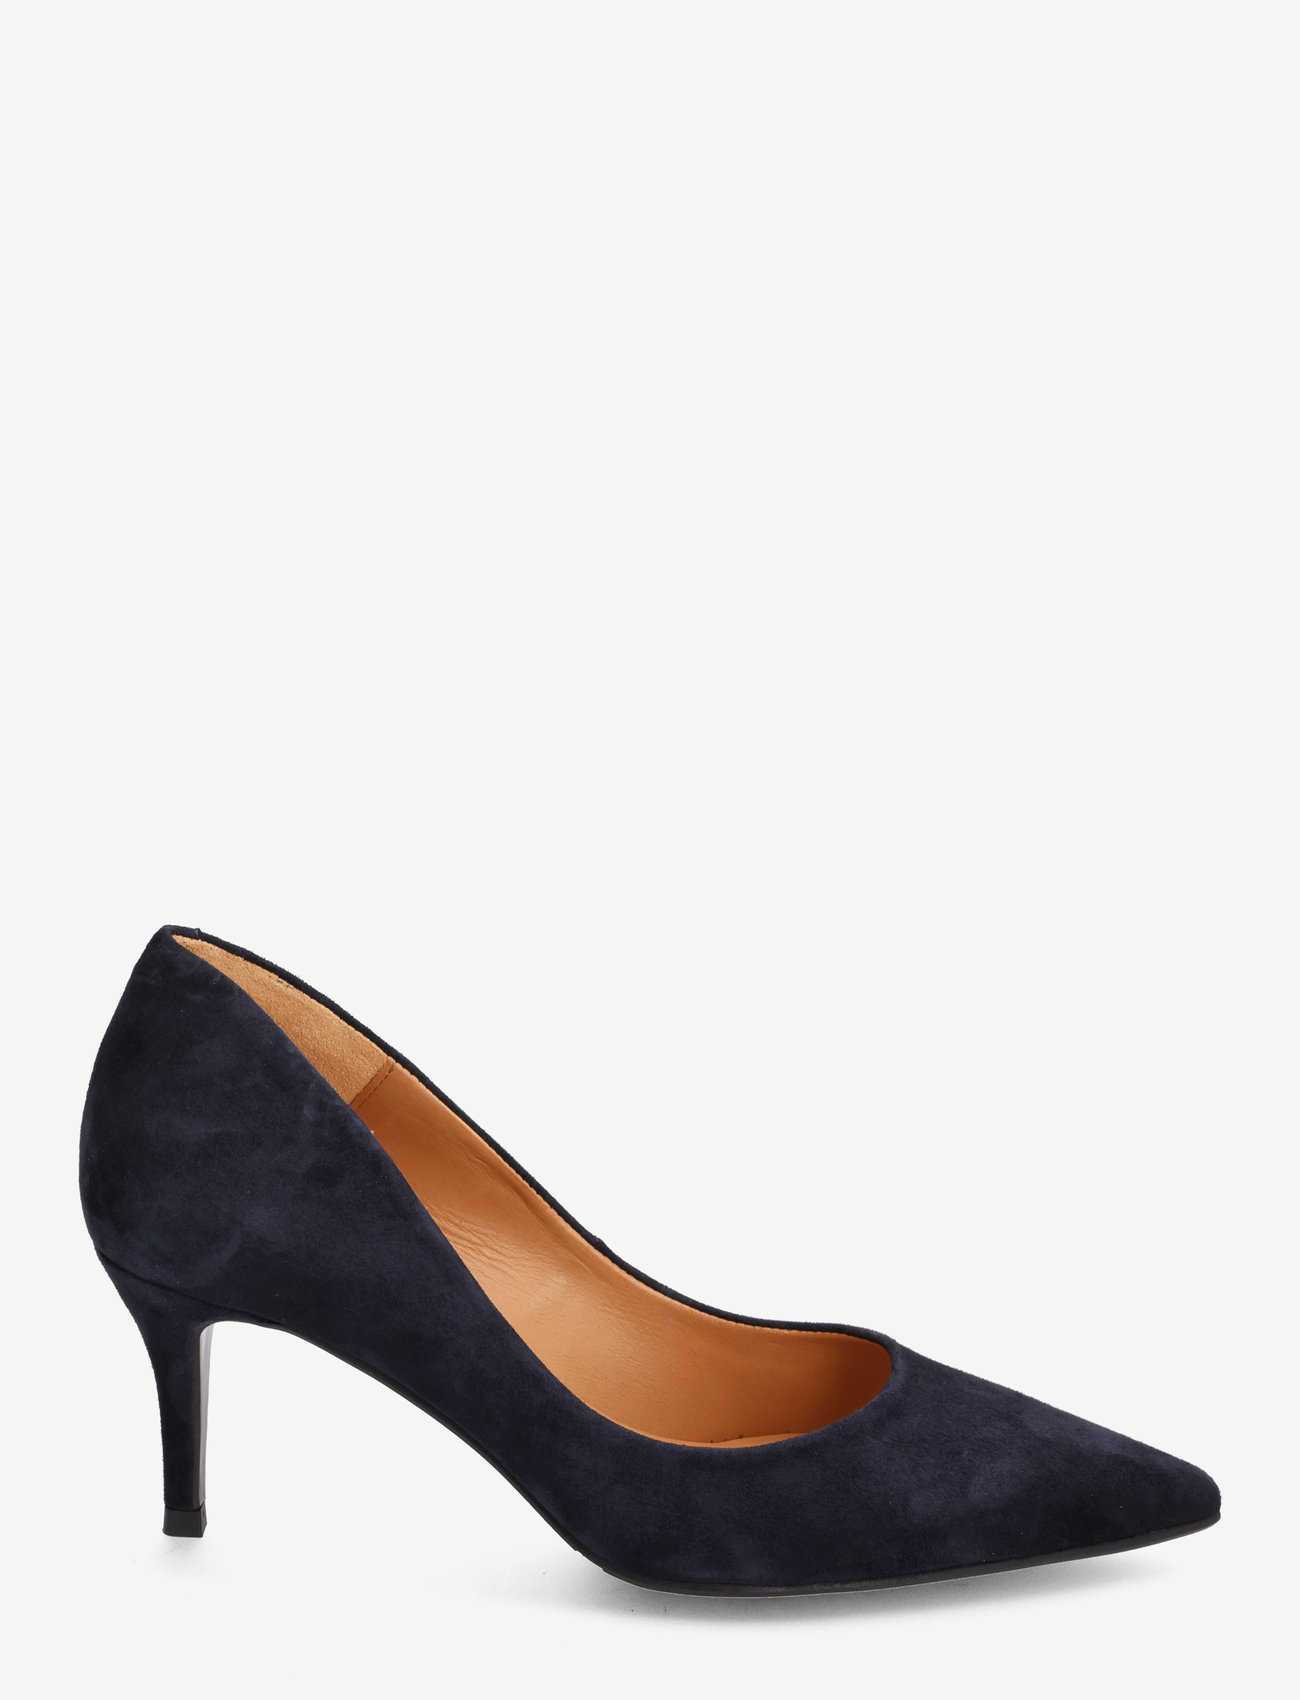 Billi Bi - Pumps - party wear at outlet prices - navy suede - 1